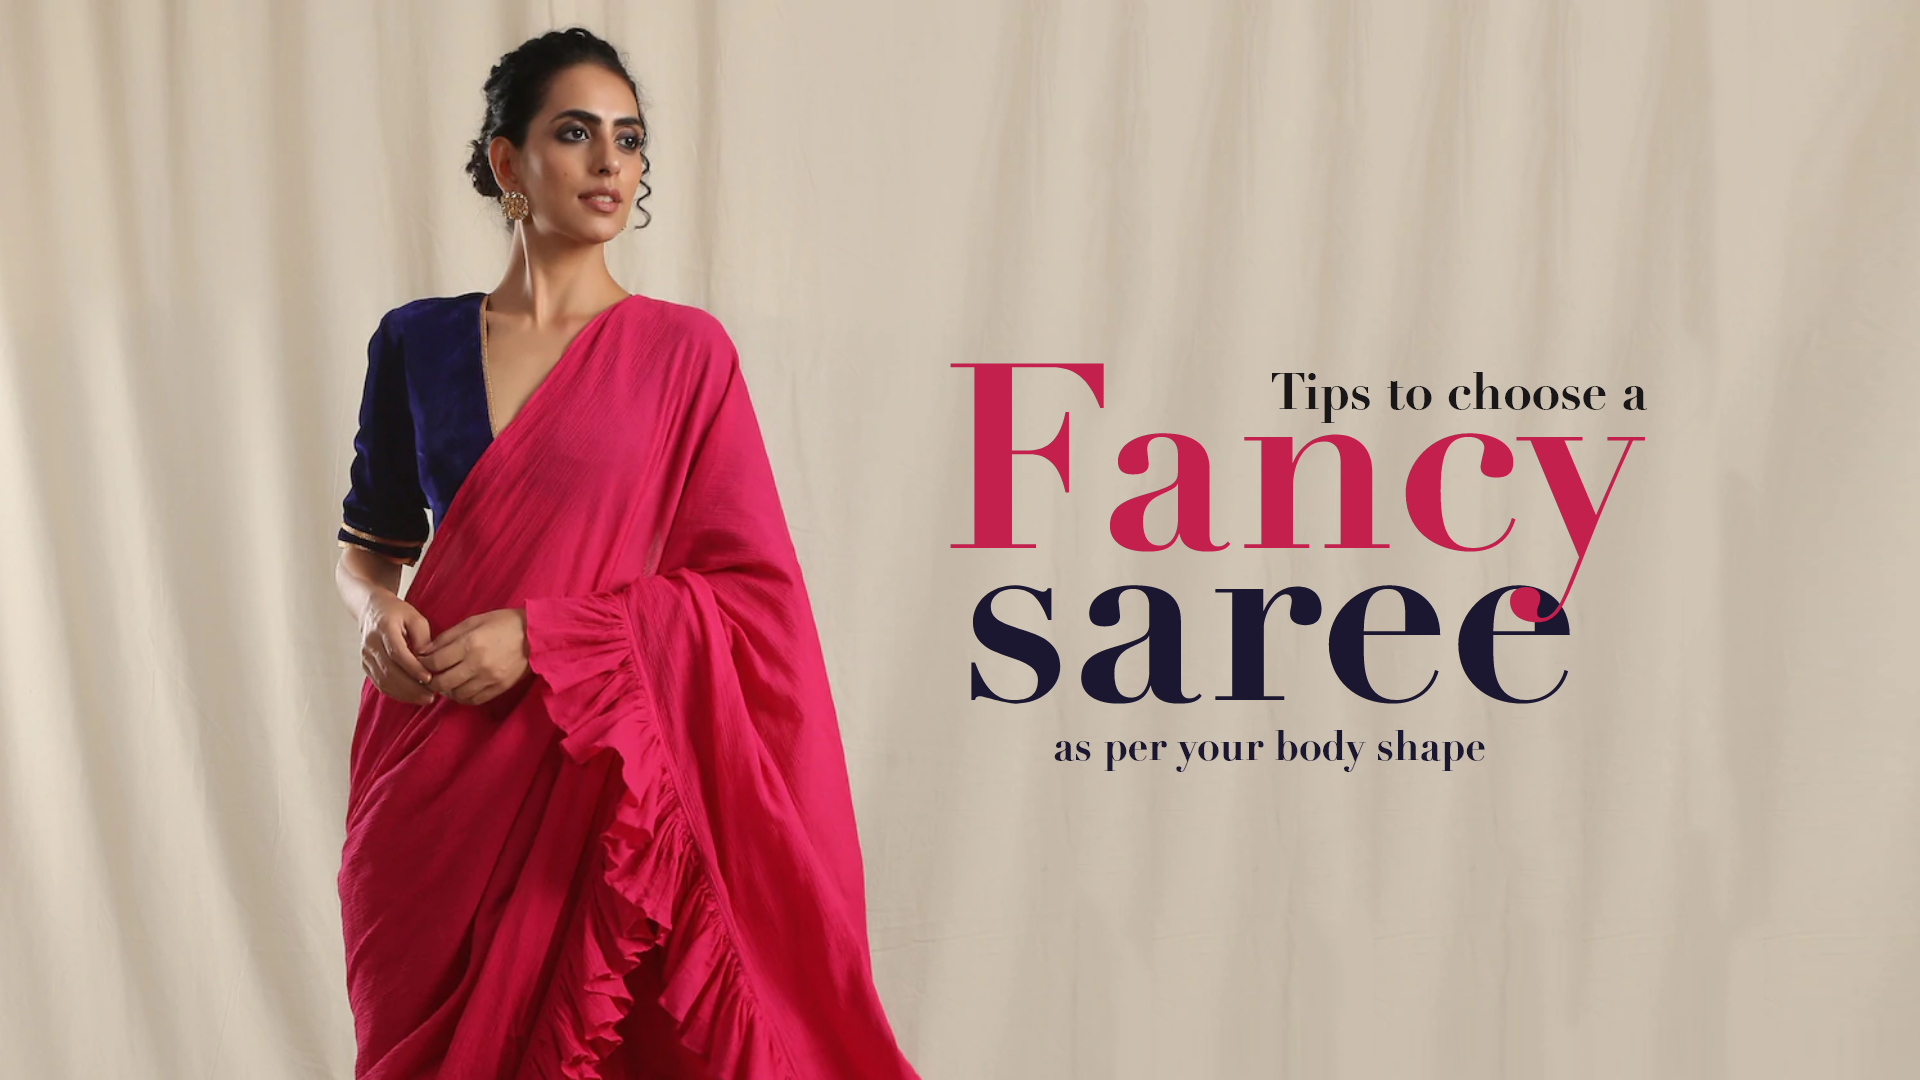 Highlight Your Curvaceous Body in a Saree With These Simple Tips